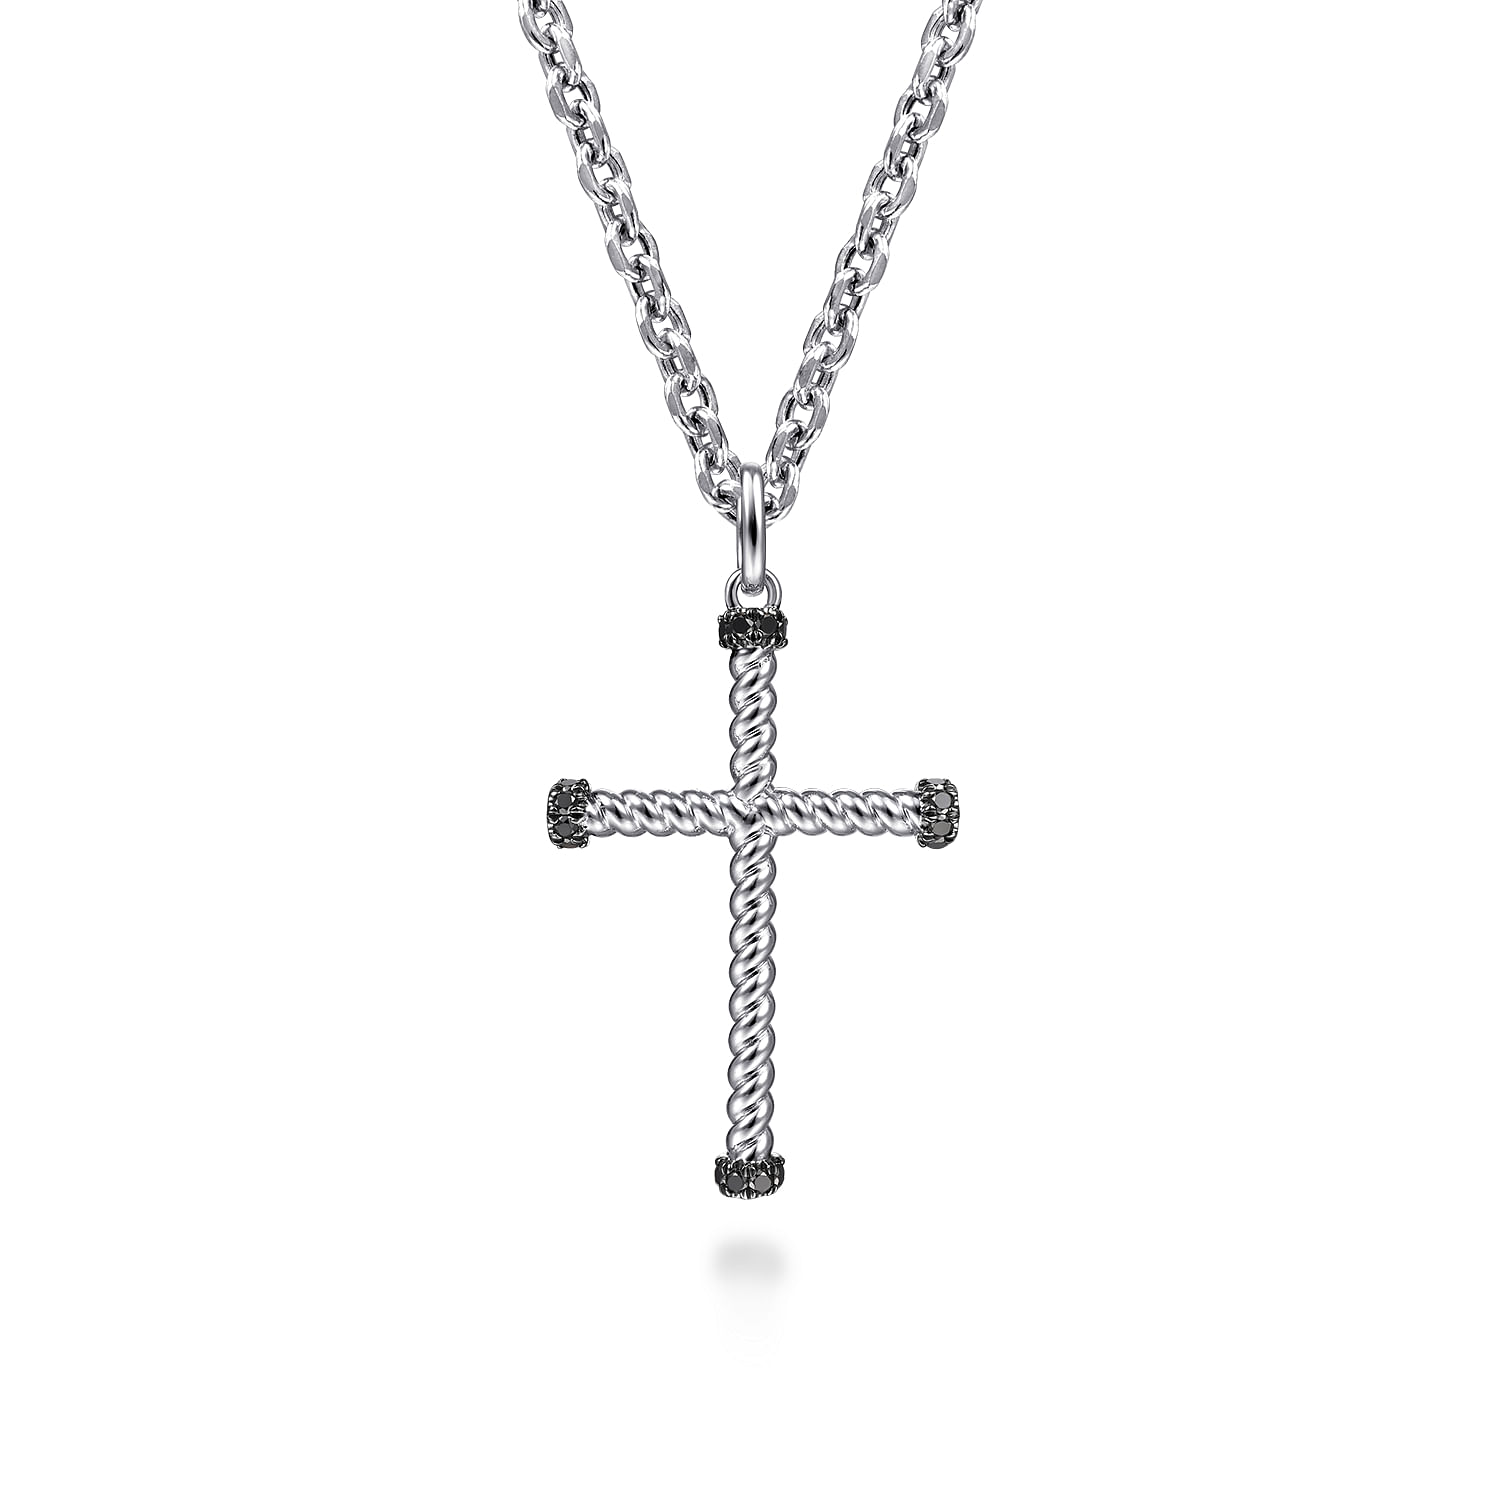 Gabriel - 22 Inch 925 Sterling Silver Twisted Rope Cross Link Chain Necklace with Black Spinel